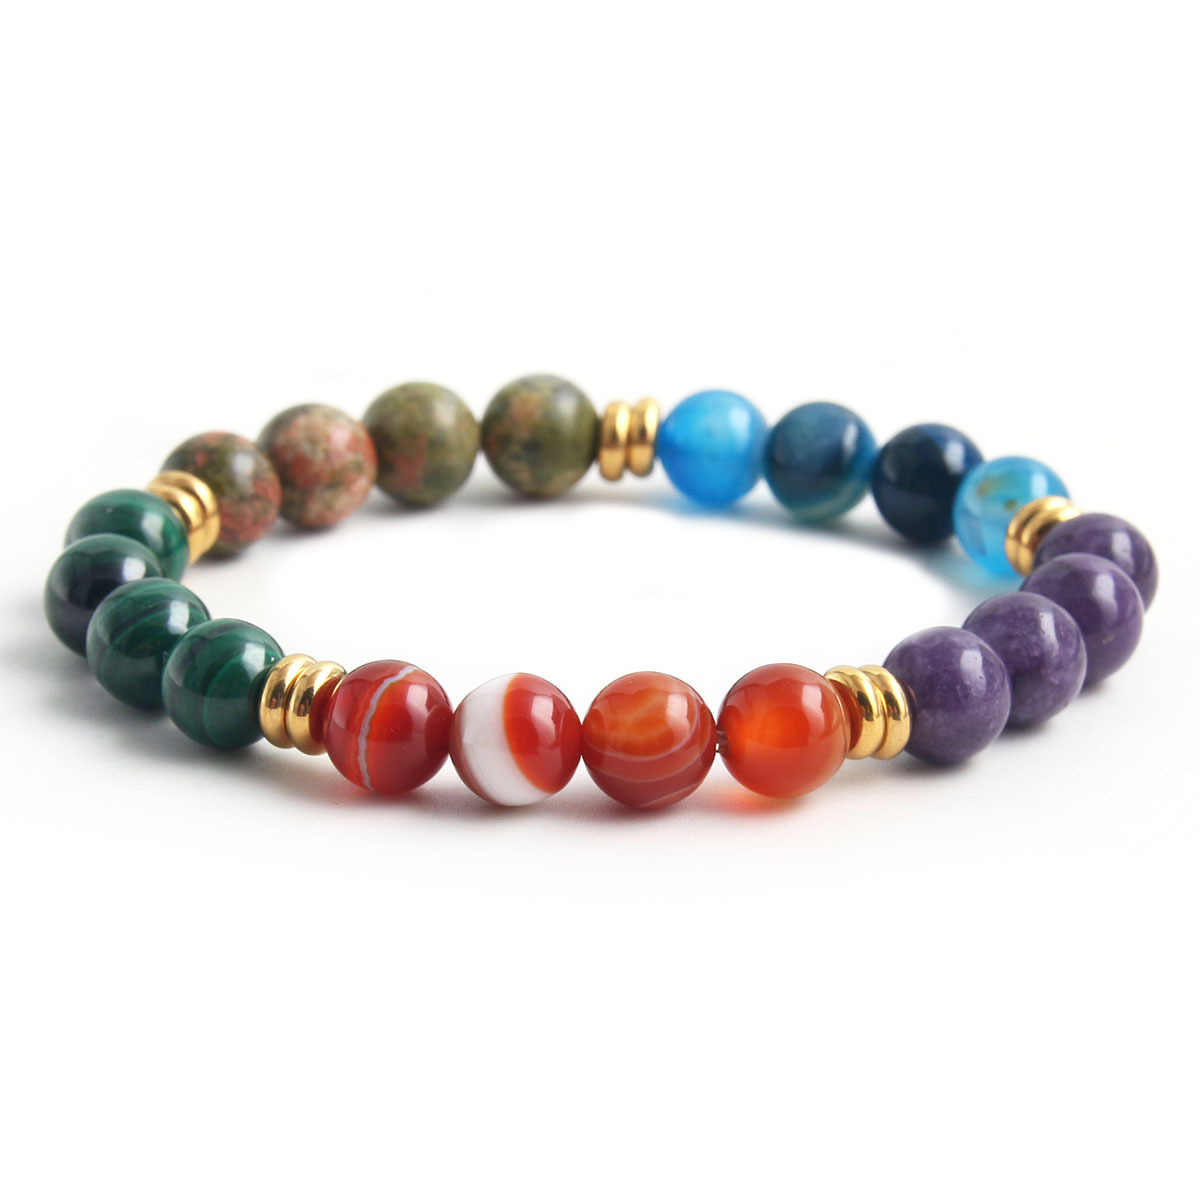 Red striped agate and amethyst and blue striped agate and flower green and malachite